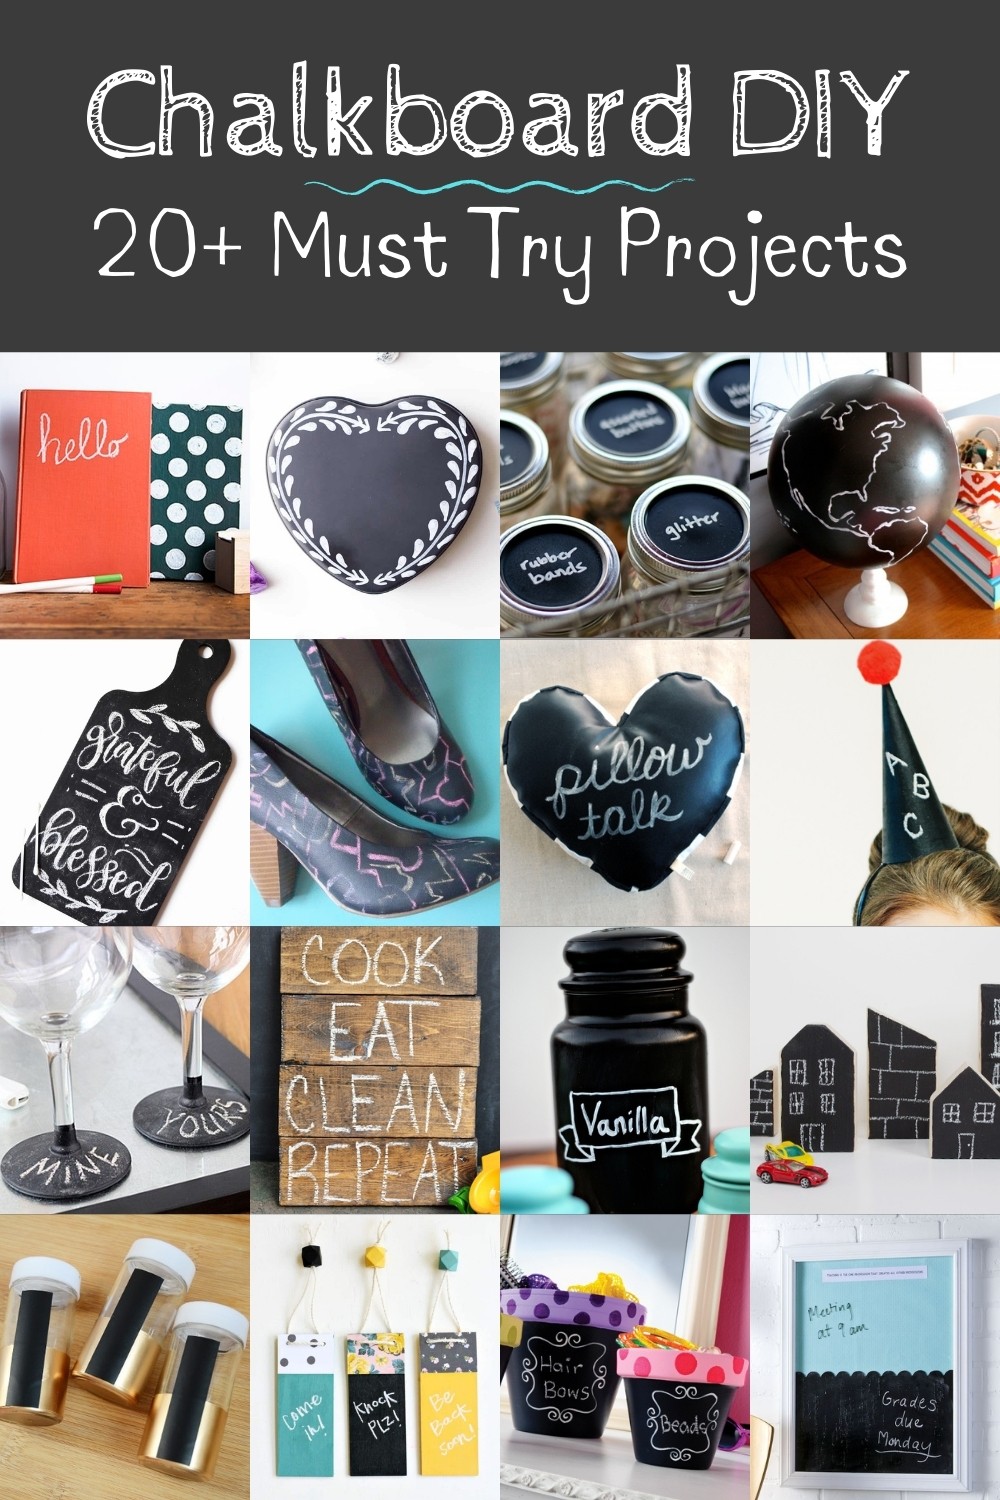 Chalkboard Crafts: 35+ Ideas You'll Have to Try! - DIY Candy